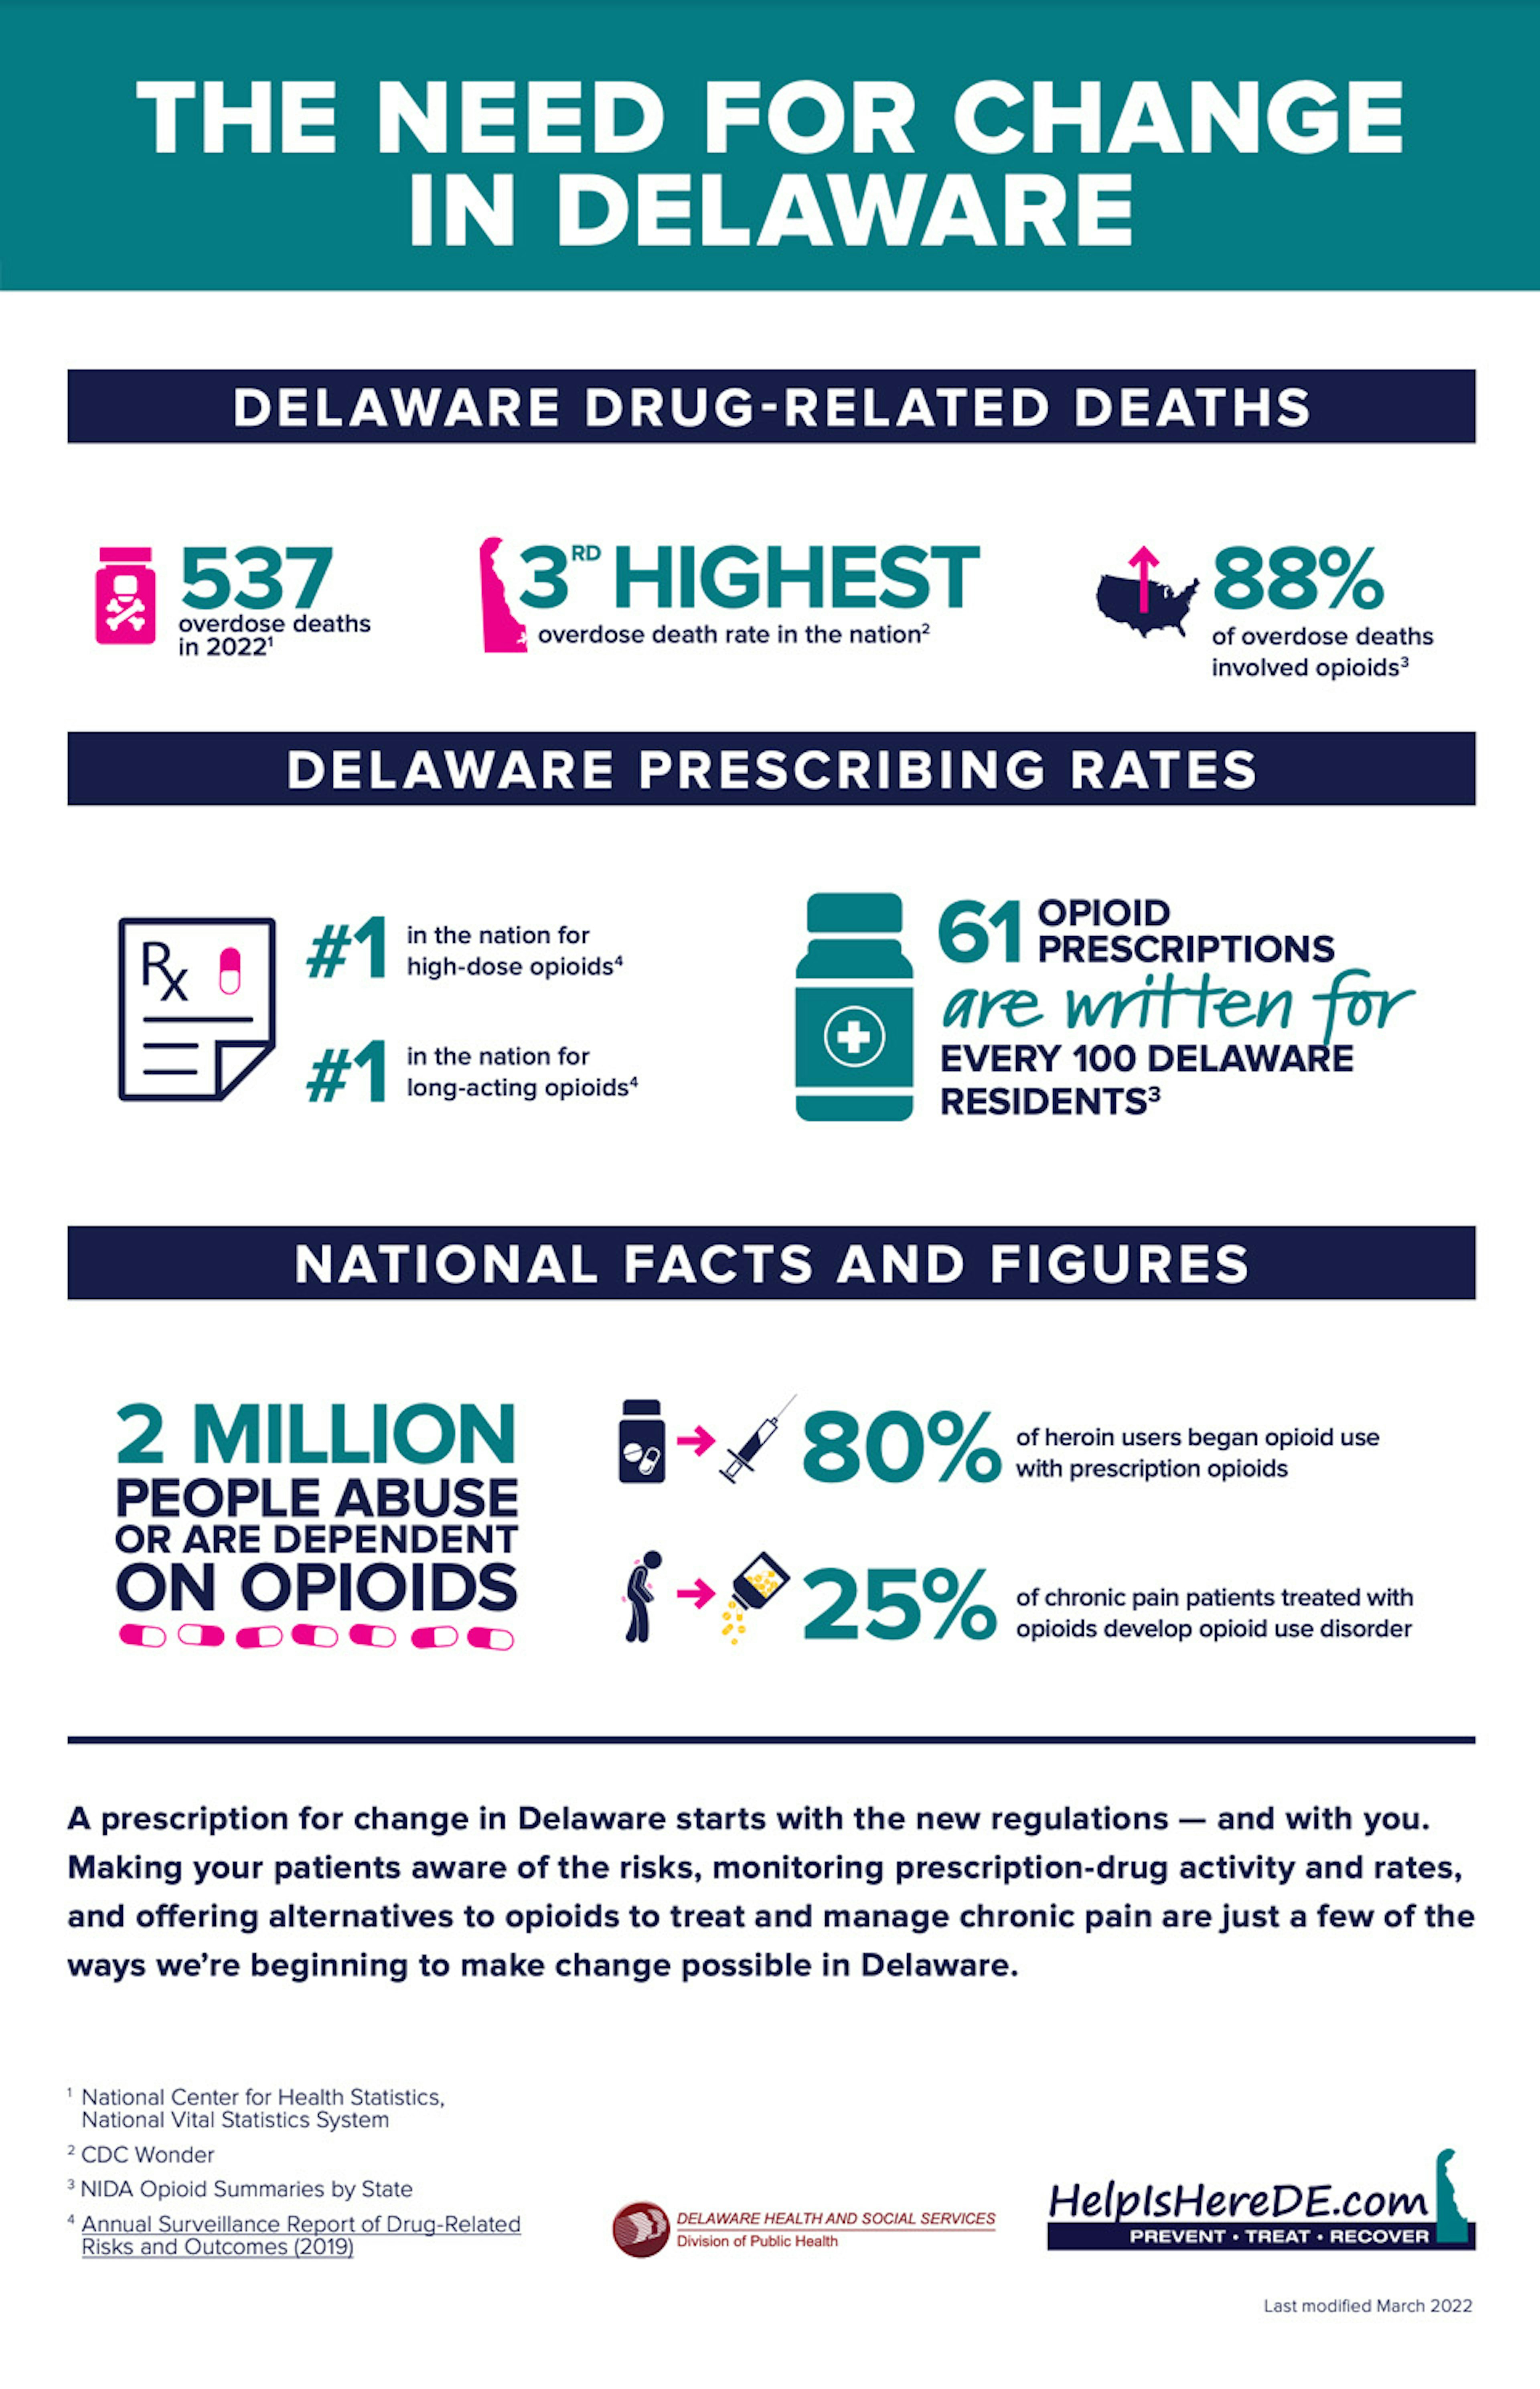 The Need for Change in Delaware infographic thumbnail image